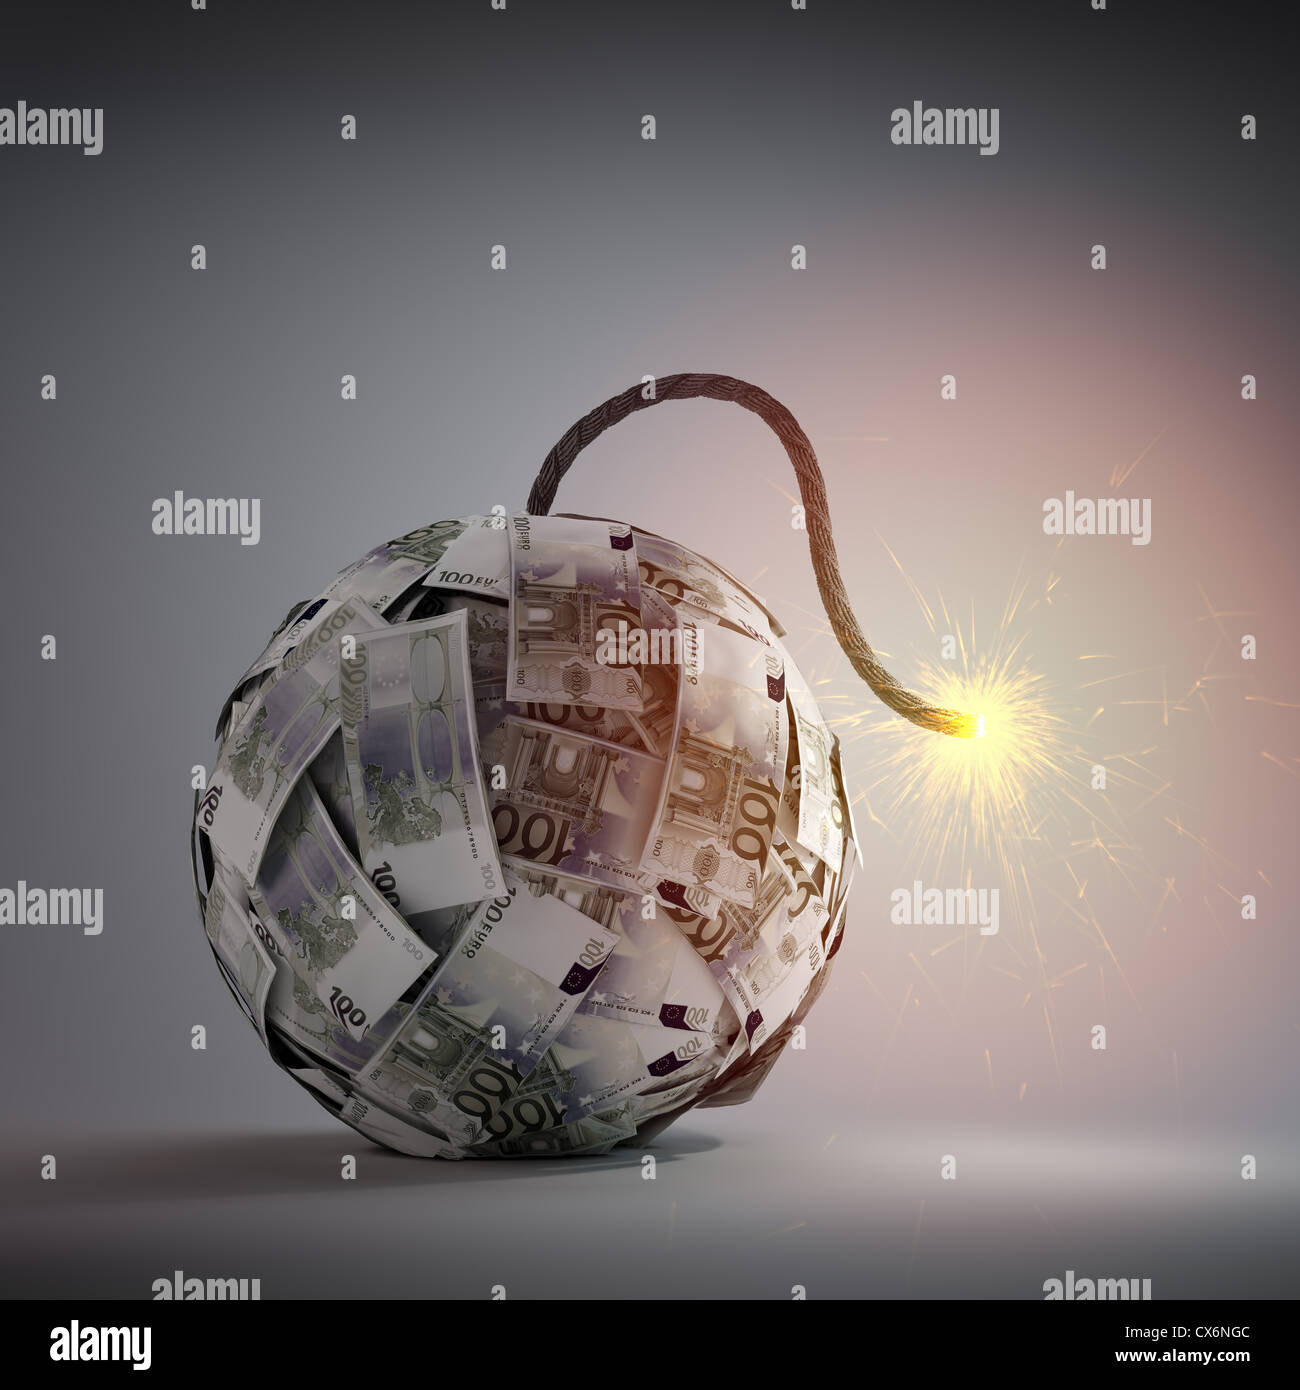 Ball of Euro bills shaped like an old bomb - government debt and financial crisis concept Stock Photo